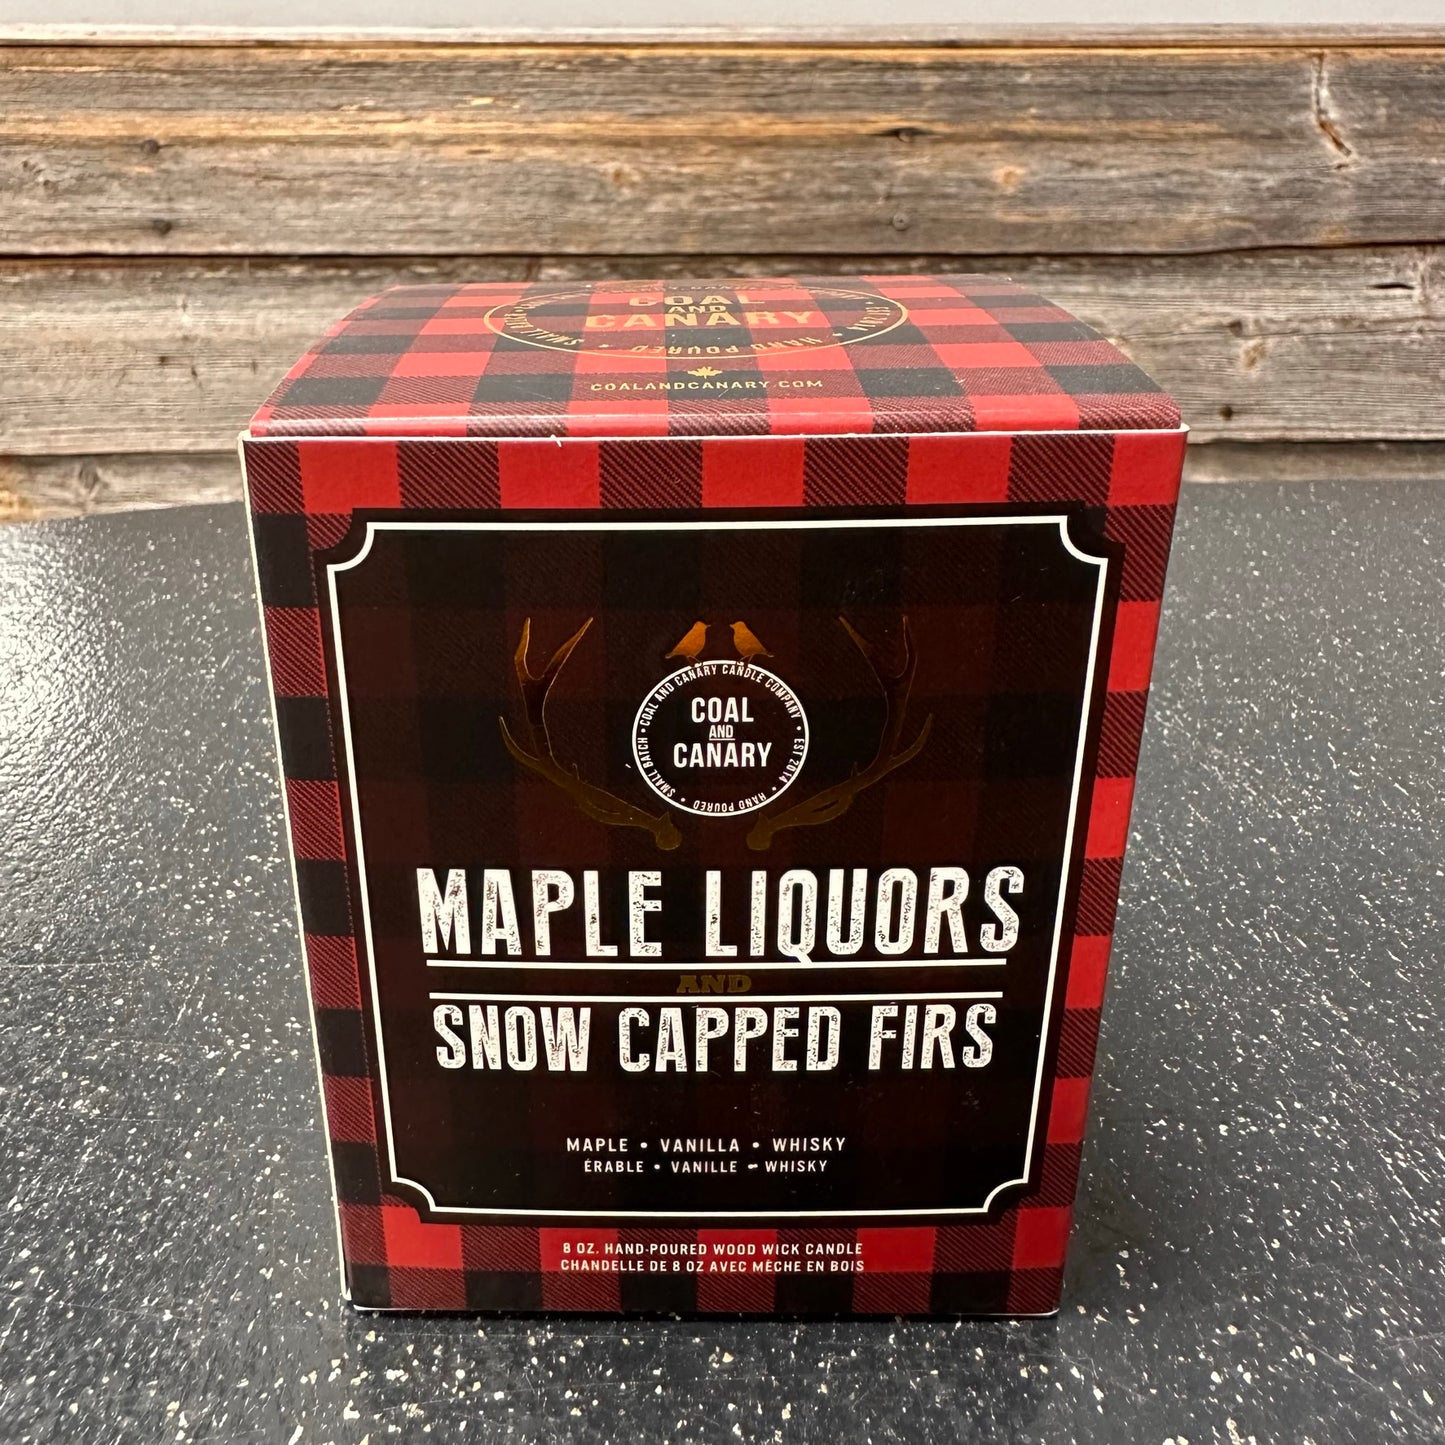 Maple Liquors & Snow Capped Firs By Coal & Canary